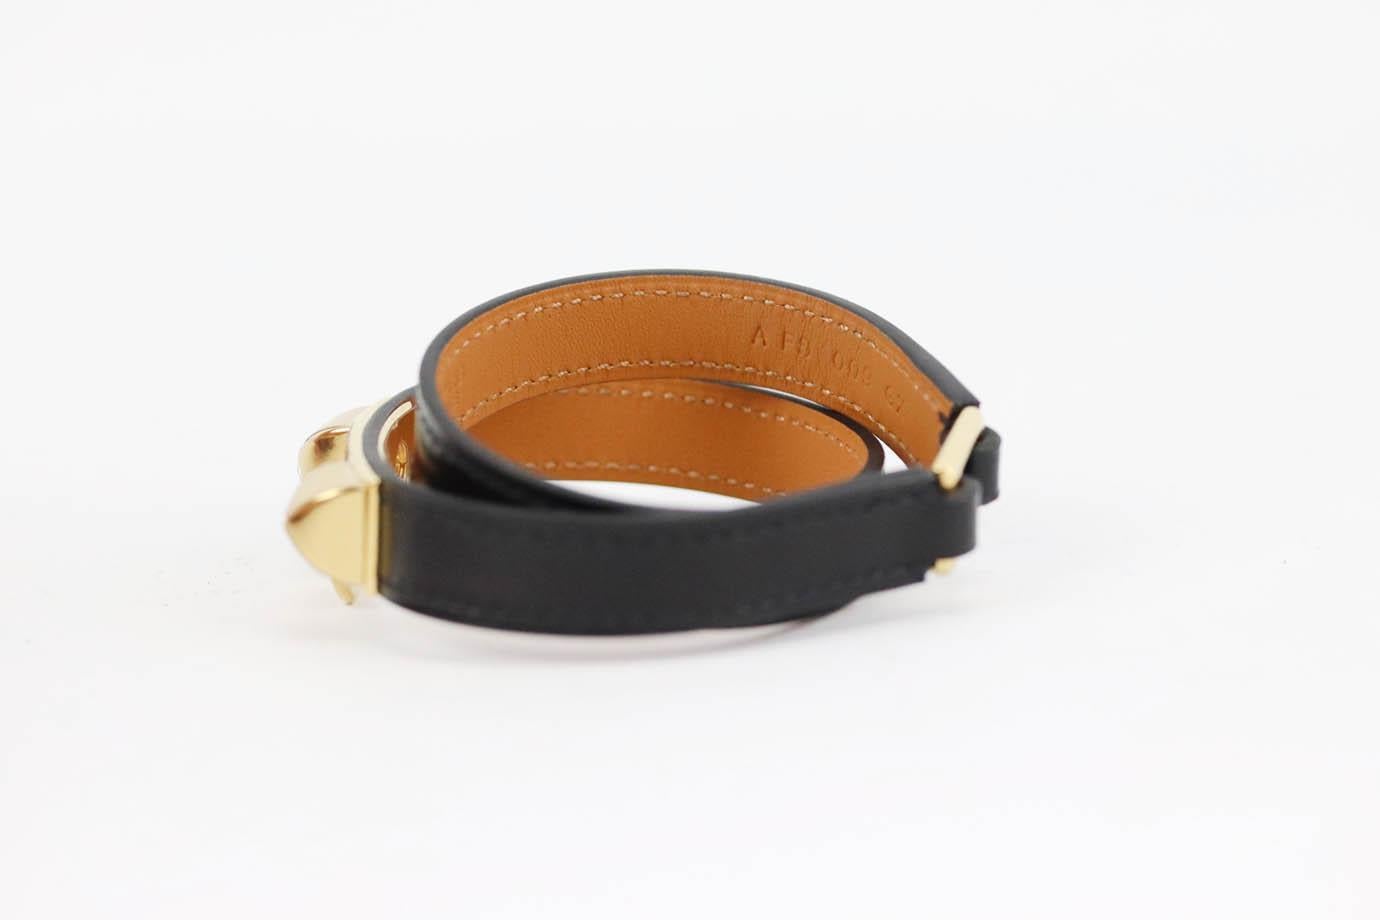 Hermès Rivale double tour leather bracelet. Black. Buckle fastening at back. Protective plastic attached. Comes with box and dustbag. Size: T3 (Circumference: 16.5 cm)
